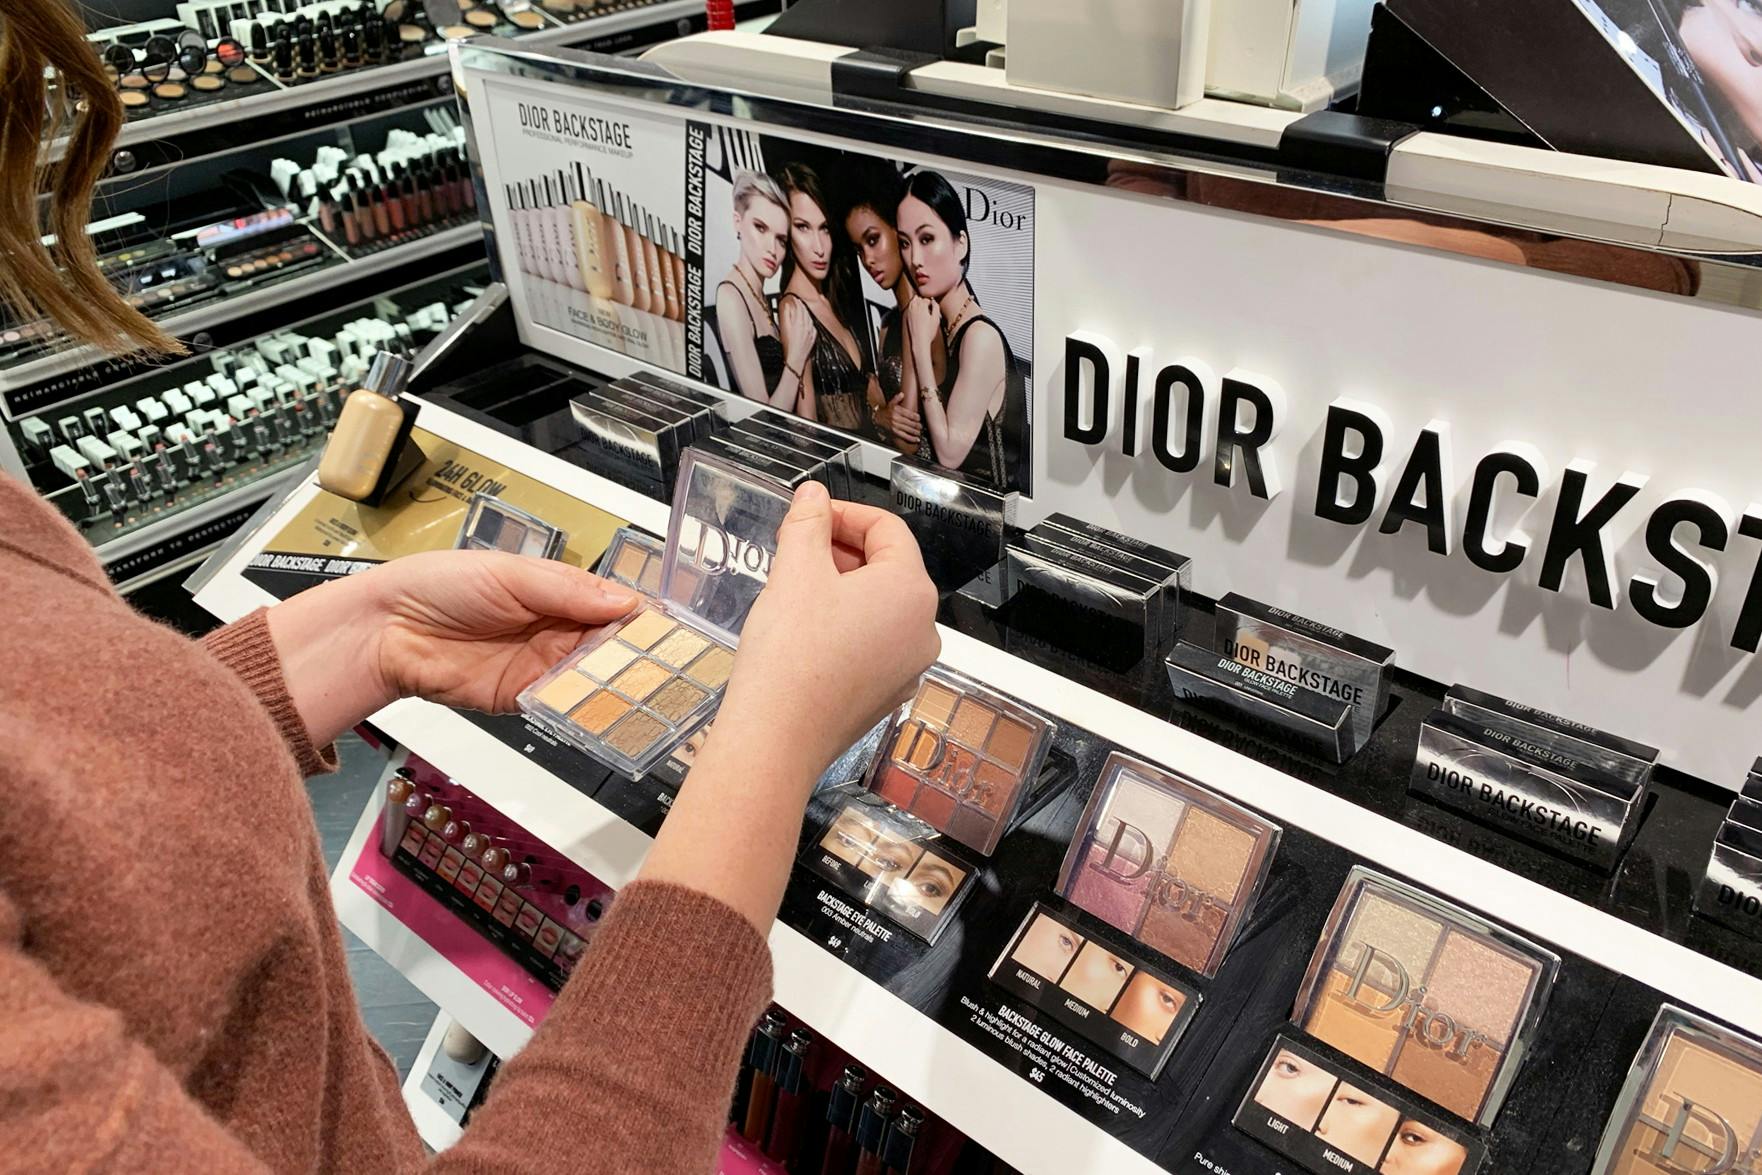 Come with us to shop at @sephora! 🤩 Grab all of your favorite